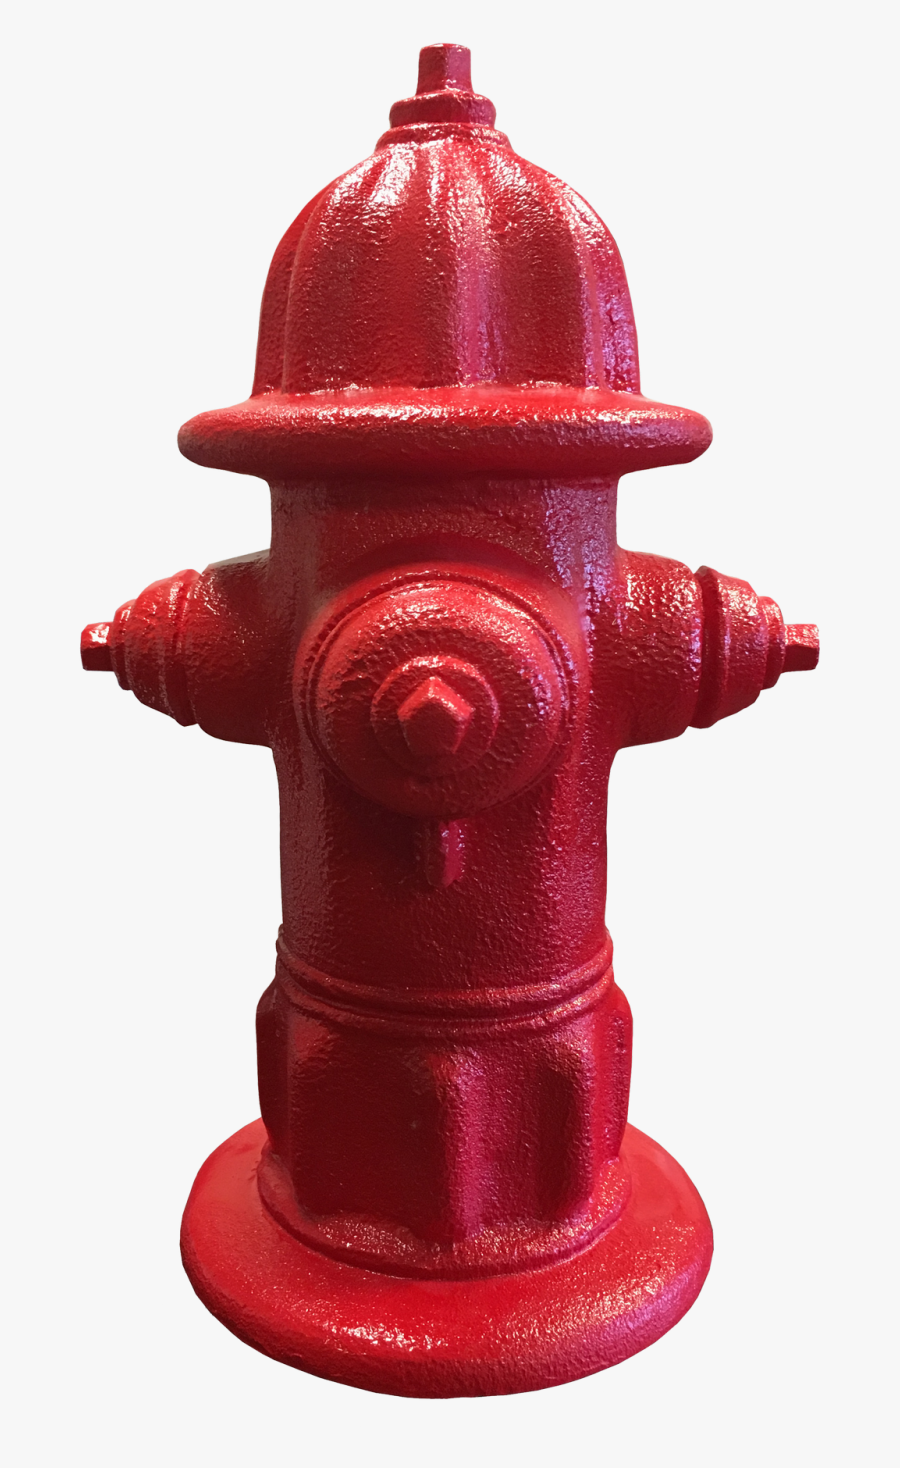 Fire Hydrant Png Image - Transparent Fire Hydrant Png, Transparent Clipart